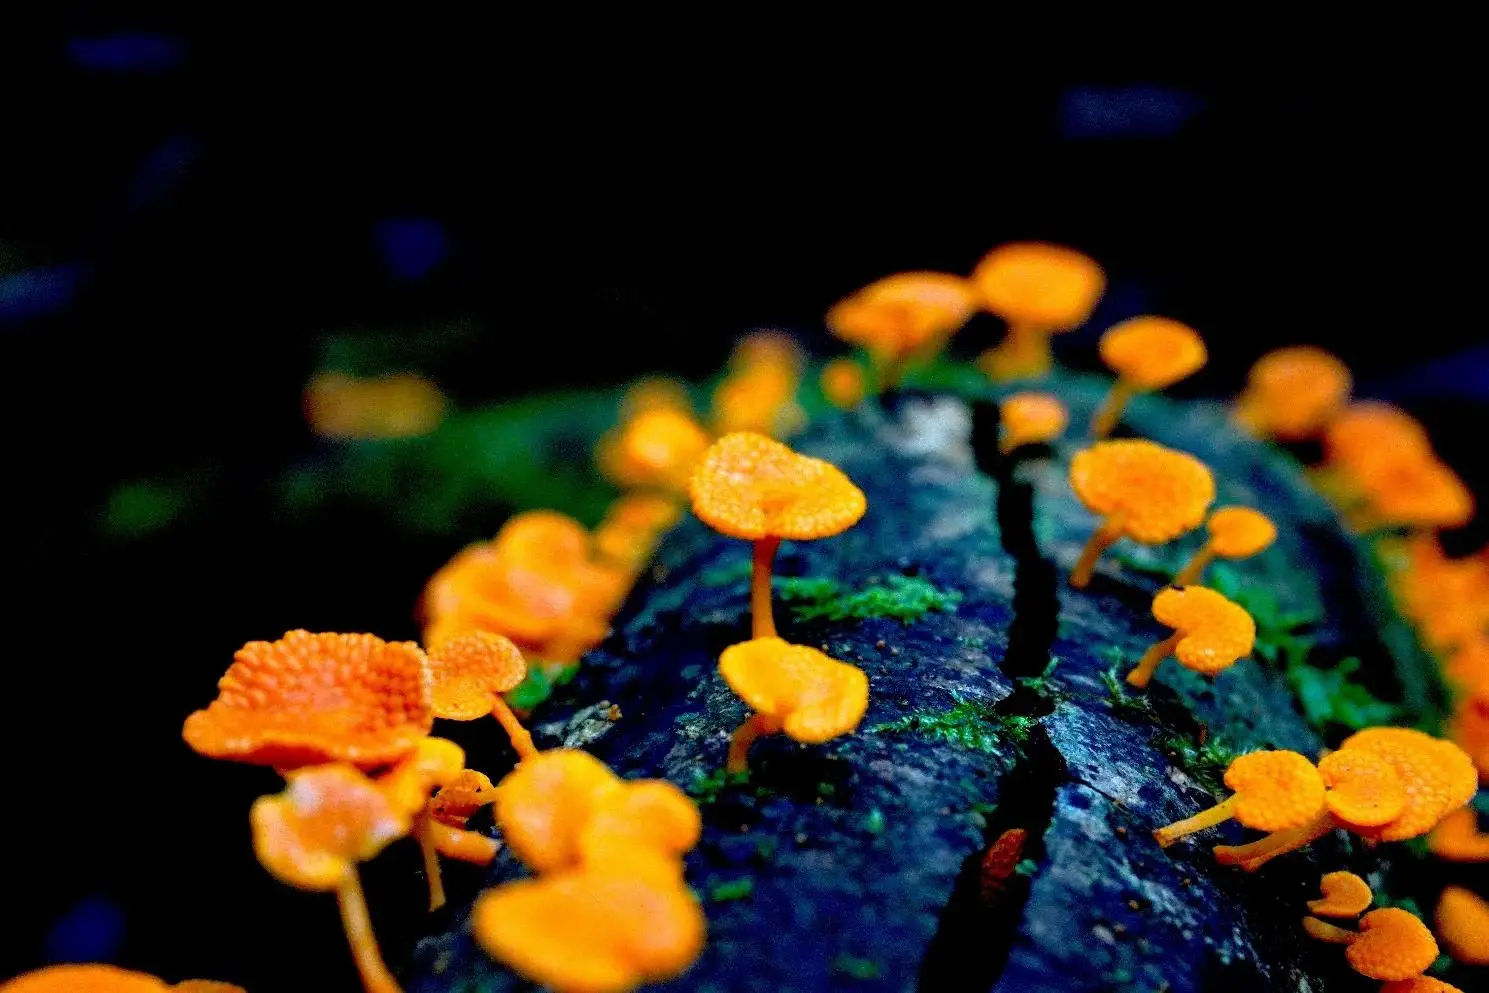 An invasive orange pore fungus poses unknown ecological consequences for Australian ecosystems.